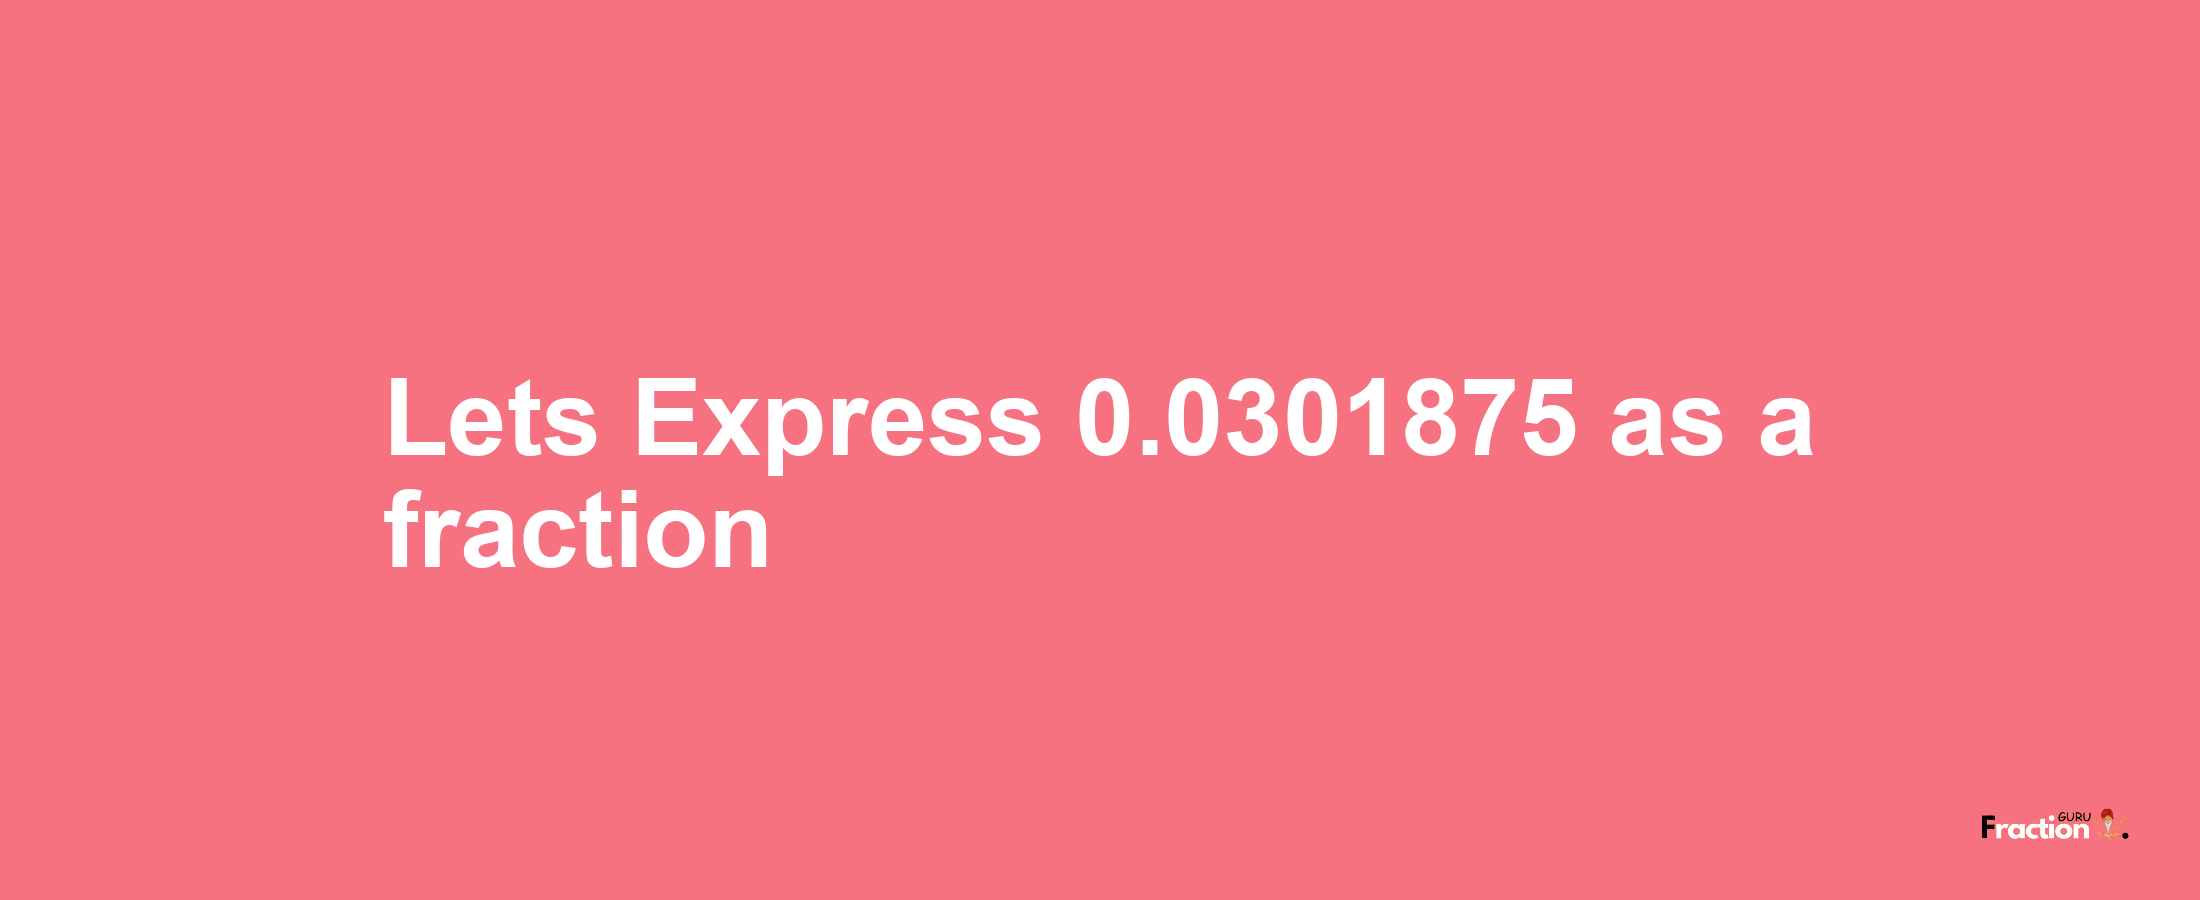 Lets Express 0.0301875 as afraction